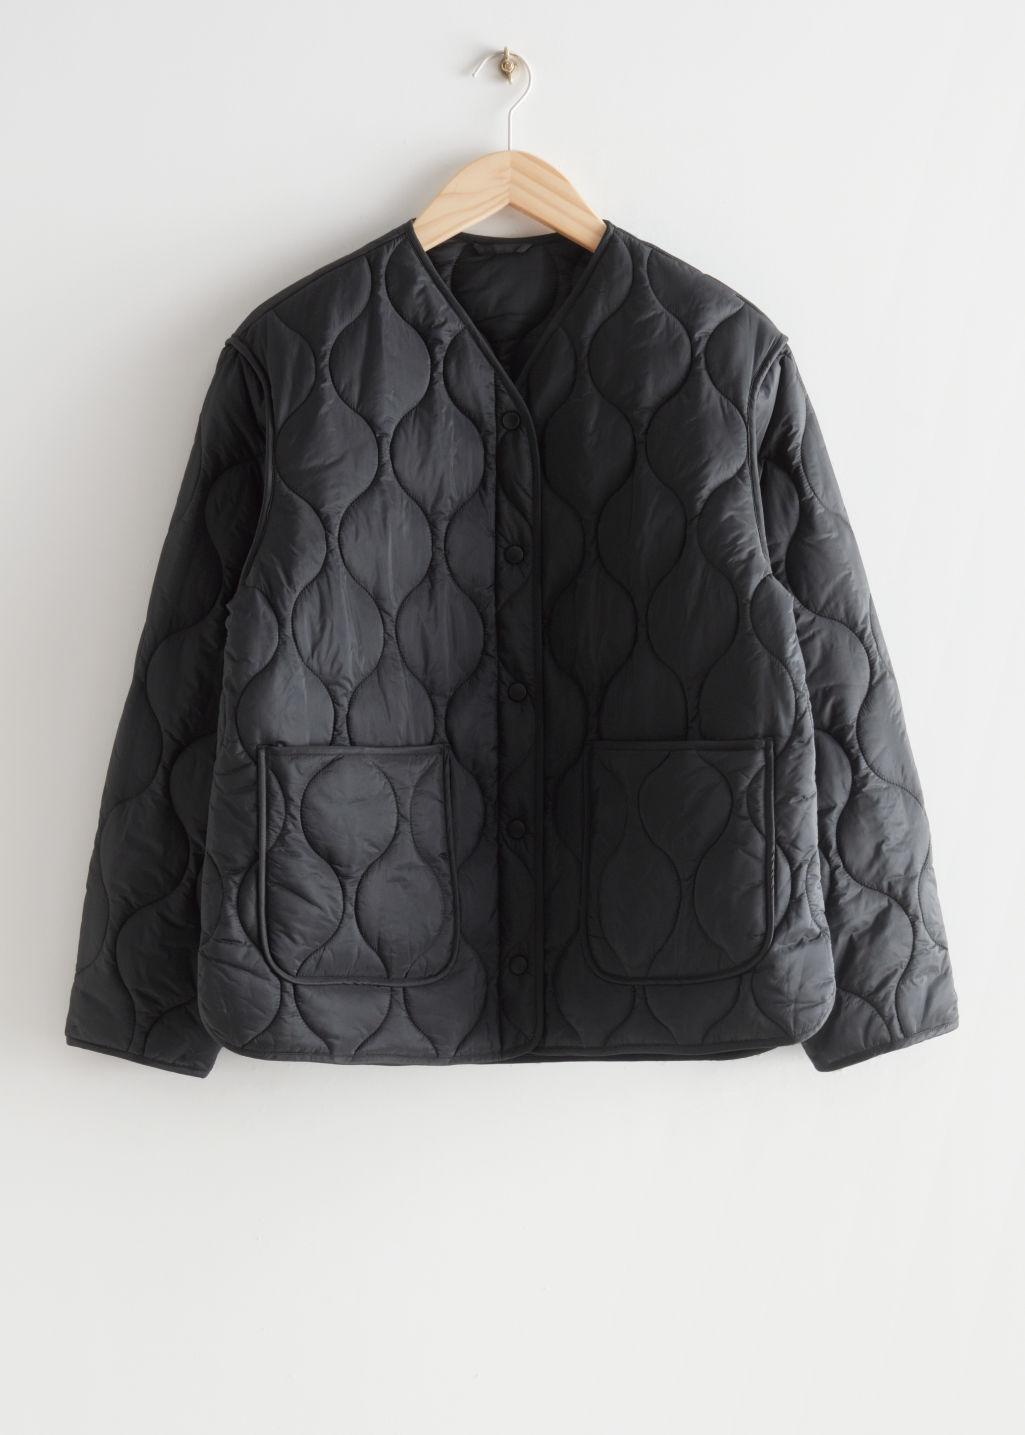 & Other Stories Oversized Wave Quilted Jacket in Black | Lyst